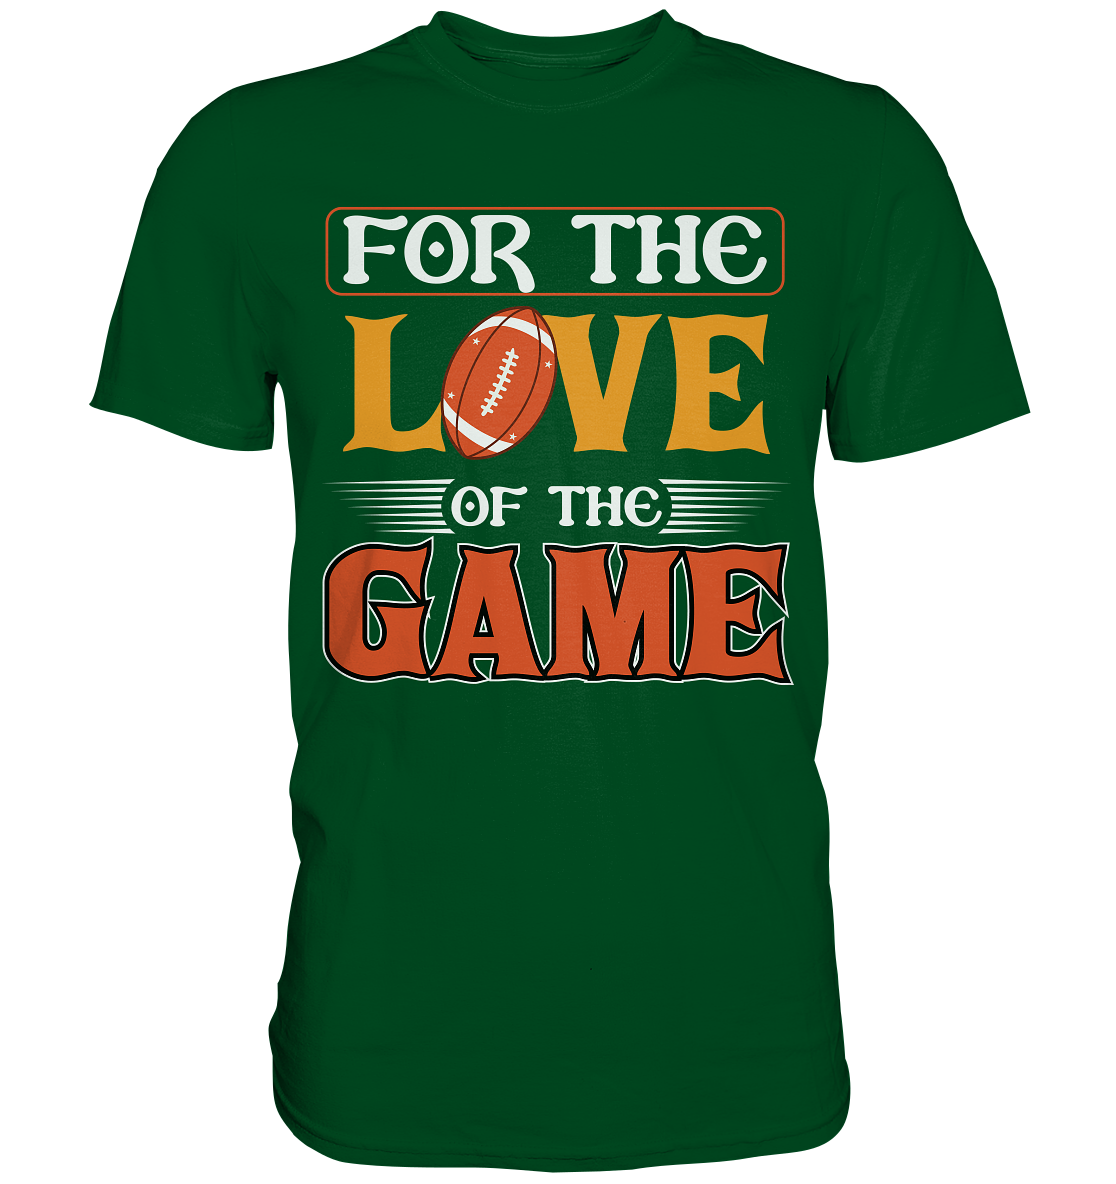 For the Love of the Game - Premium Shirt - Football Unity Football Unity